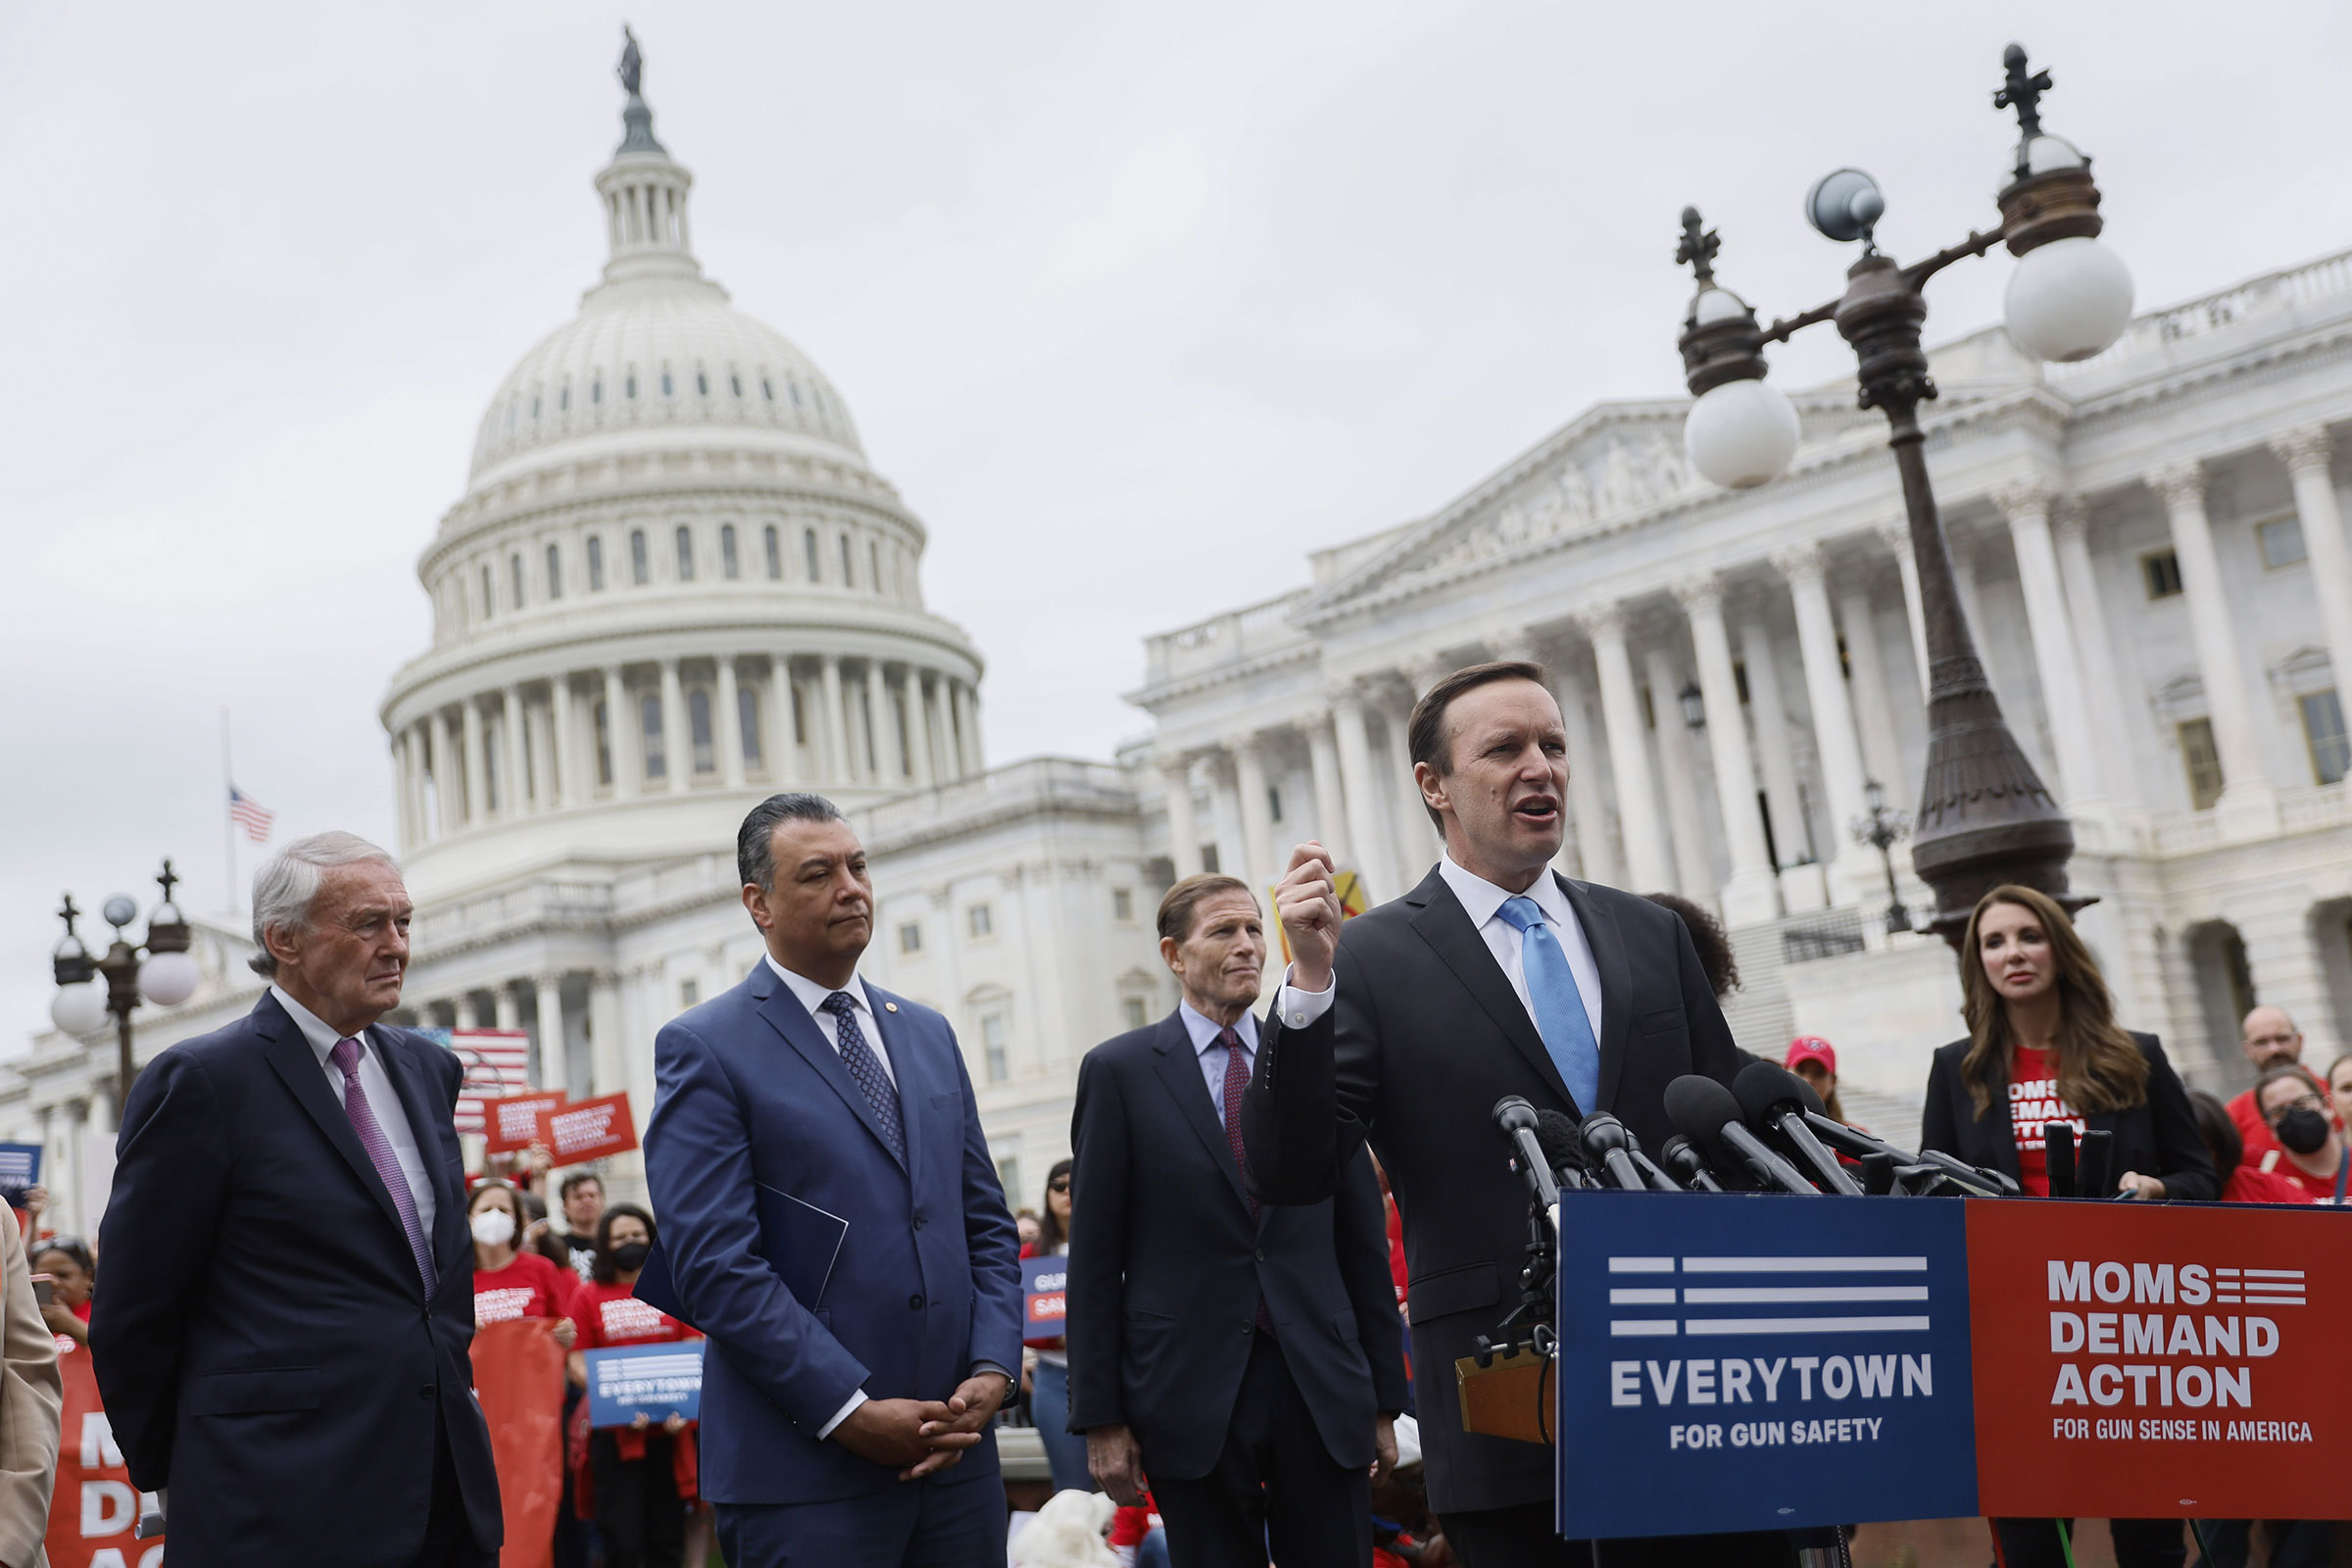 Senator Chris Murphy speaks during a rally calling for action on gun safety on Capitol Hill in Washington, on May 26. (Ting Shen—Bloomberg/Getty Images)